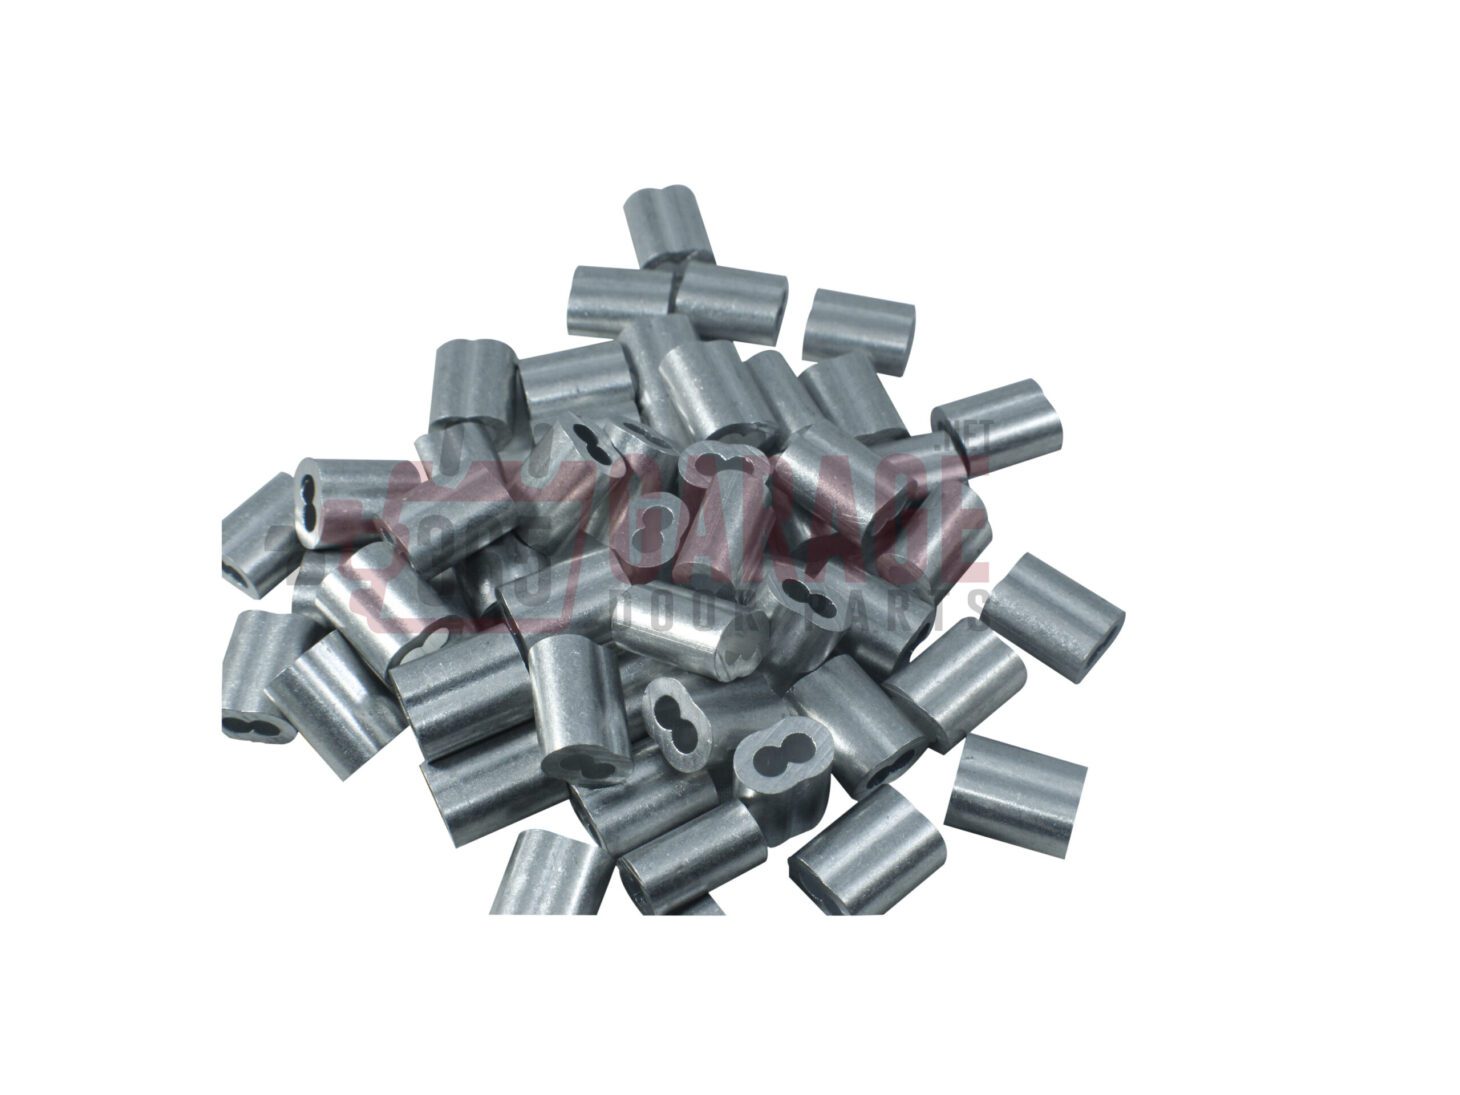 Aluminum and Brass Crimp Sleeves 100 Pack